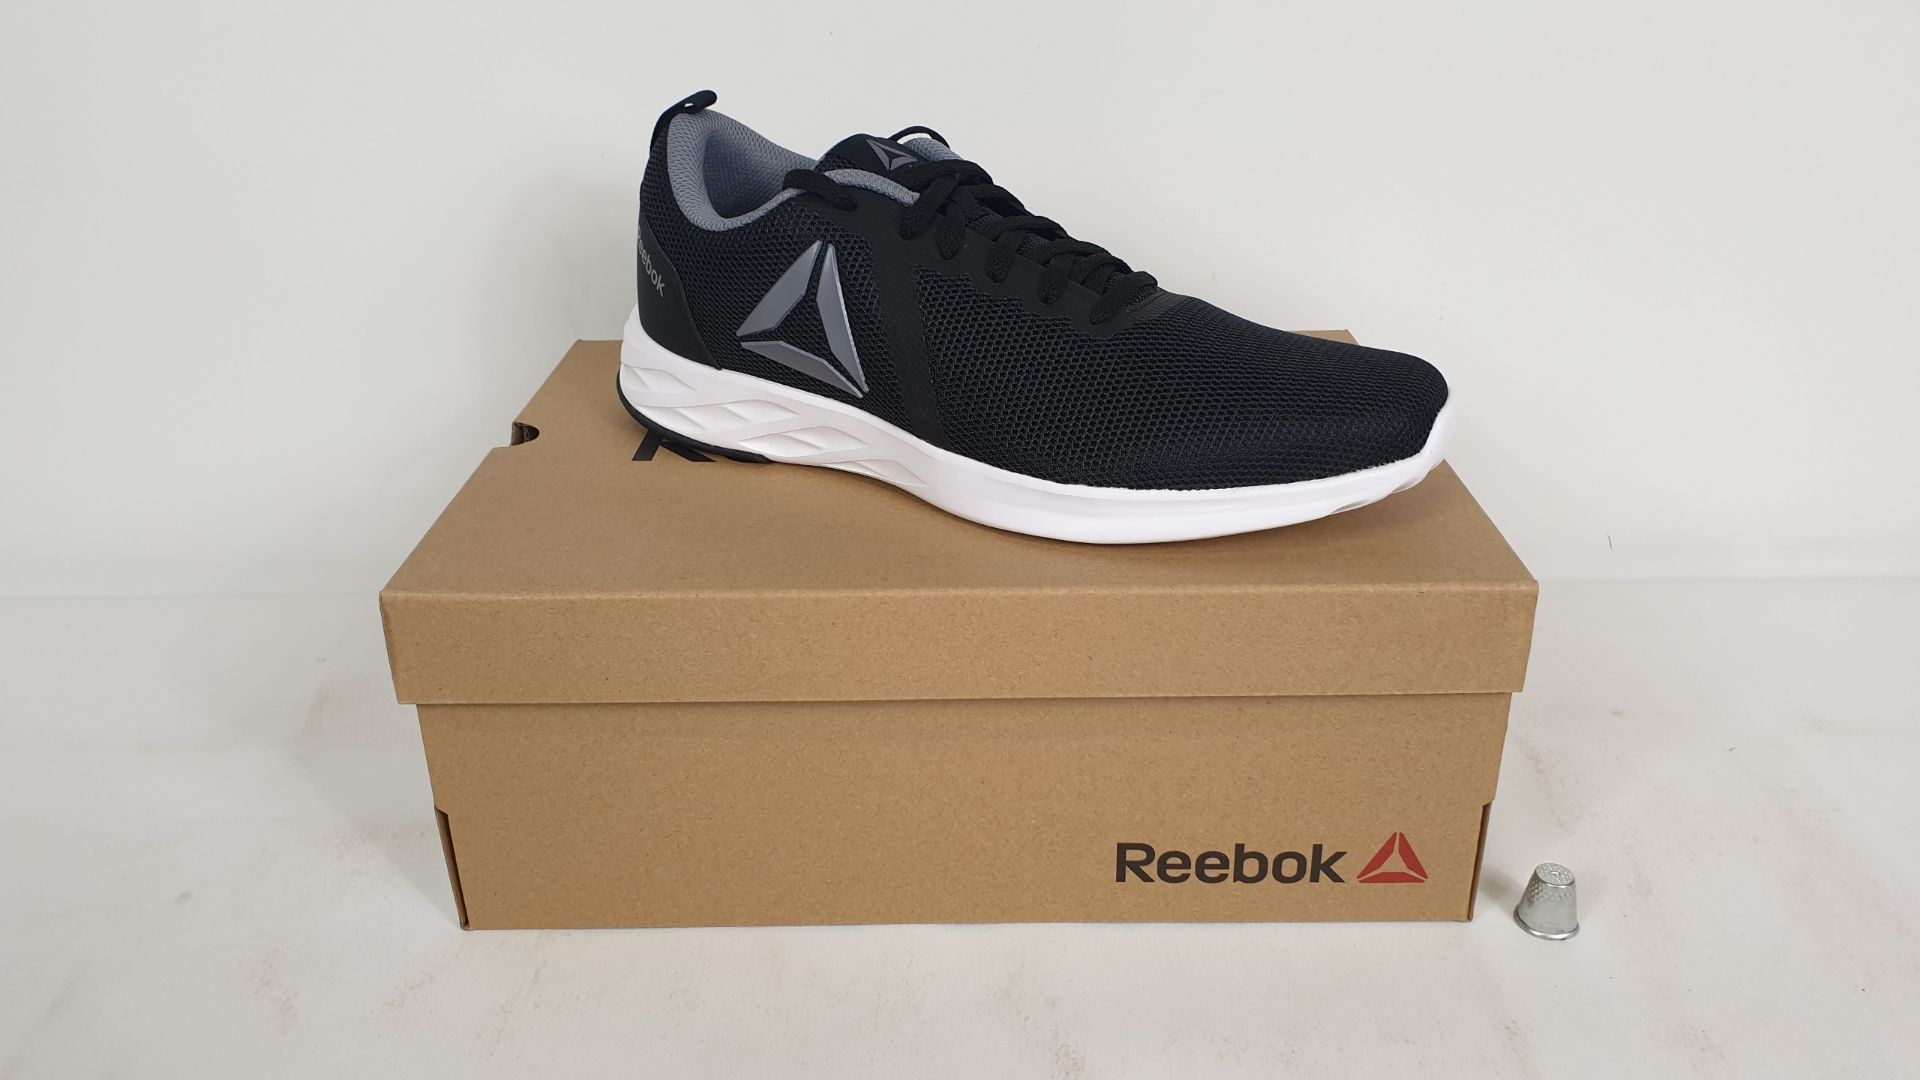 6 X PAIRS OF REEBOK TRAINERS ASTRO RIDE ESSENTIAL BLACK/ WHITE SIZE 9.5 - BRAND NEW AND BOXED